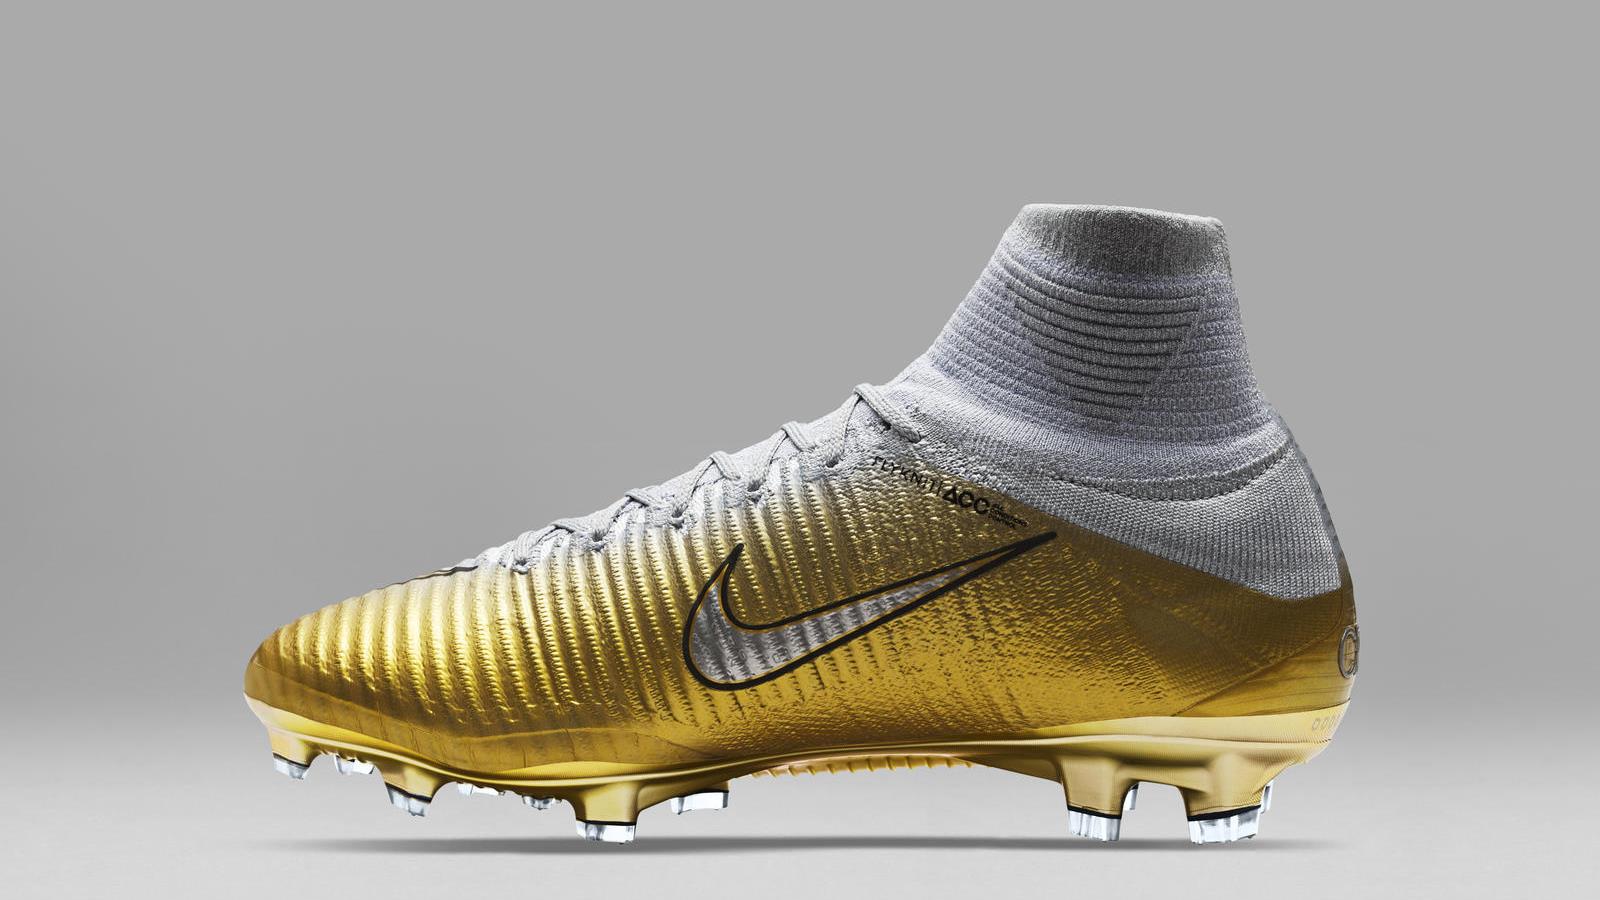 Nike Superfly IV new color to be released The Football shoes